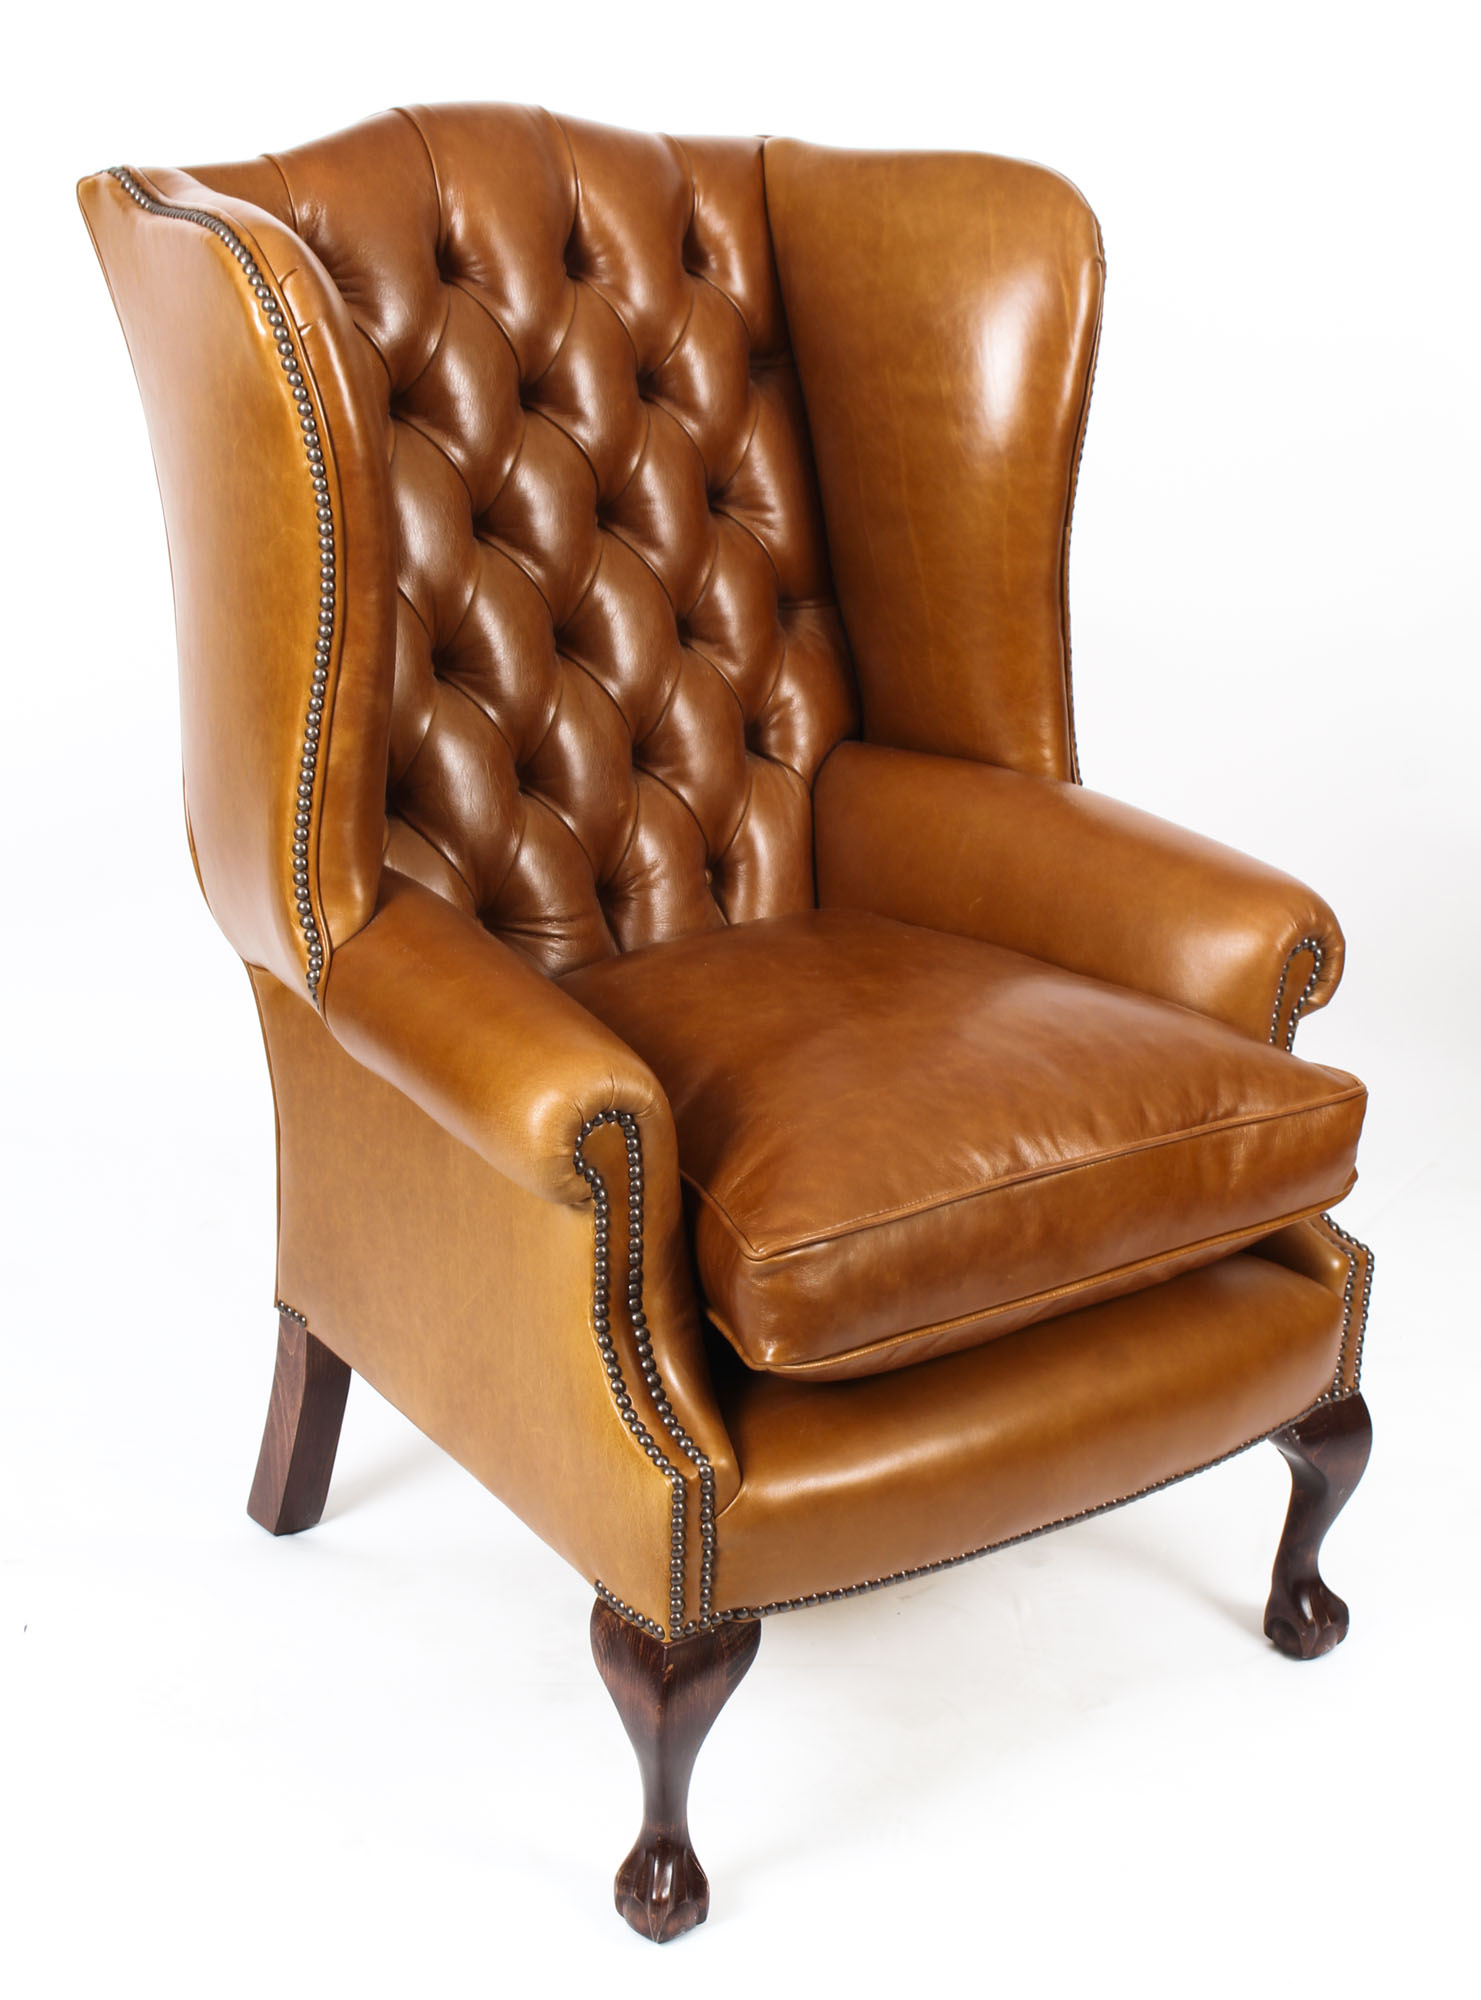 Bespoke Leather Ref No 06566f, Wing Back Leather Chairs